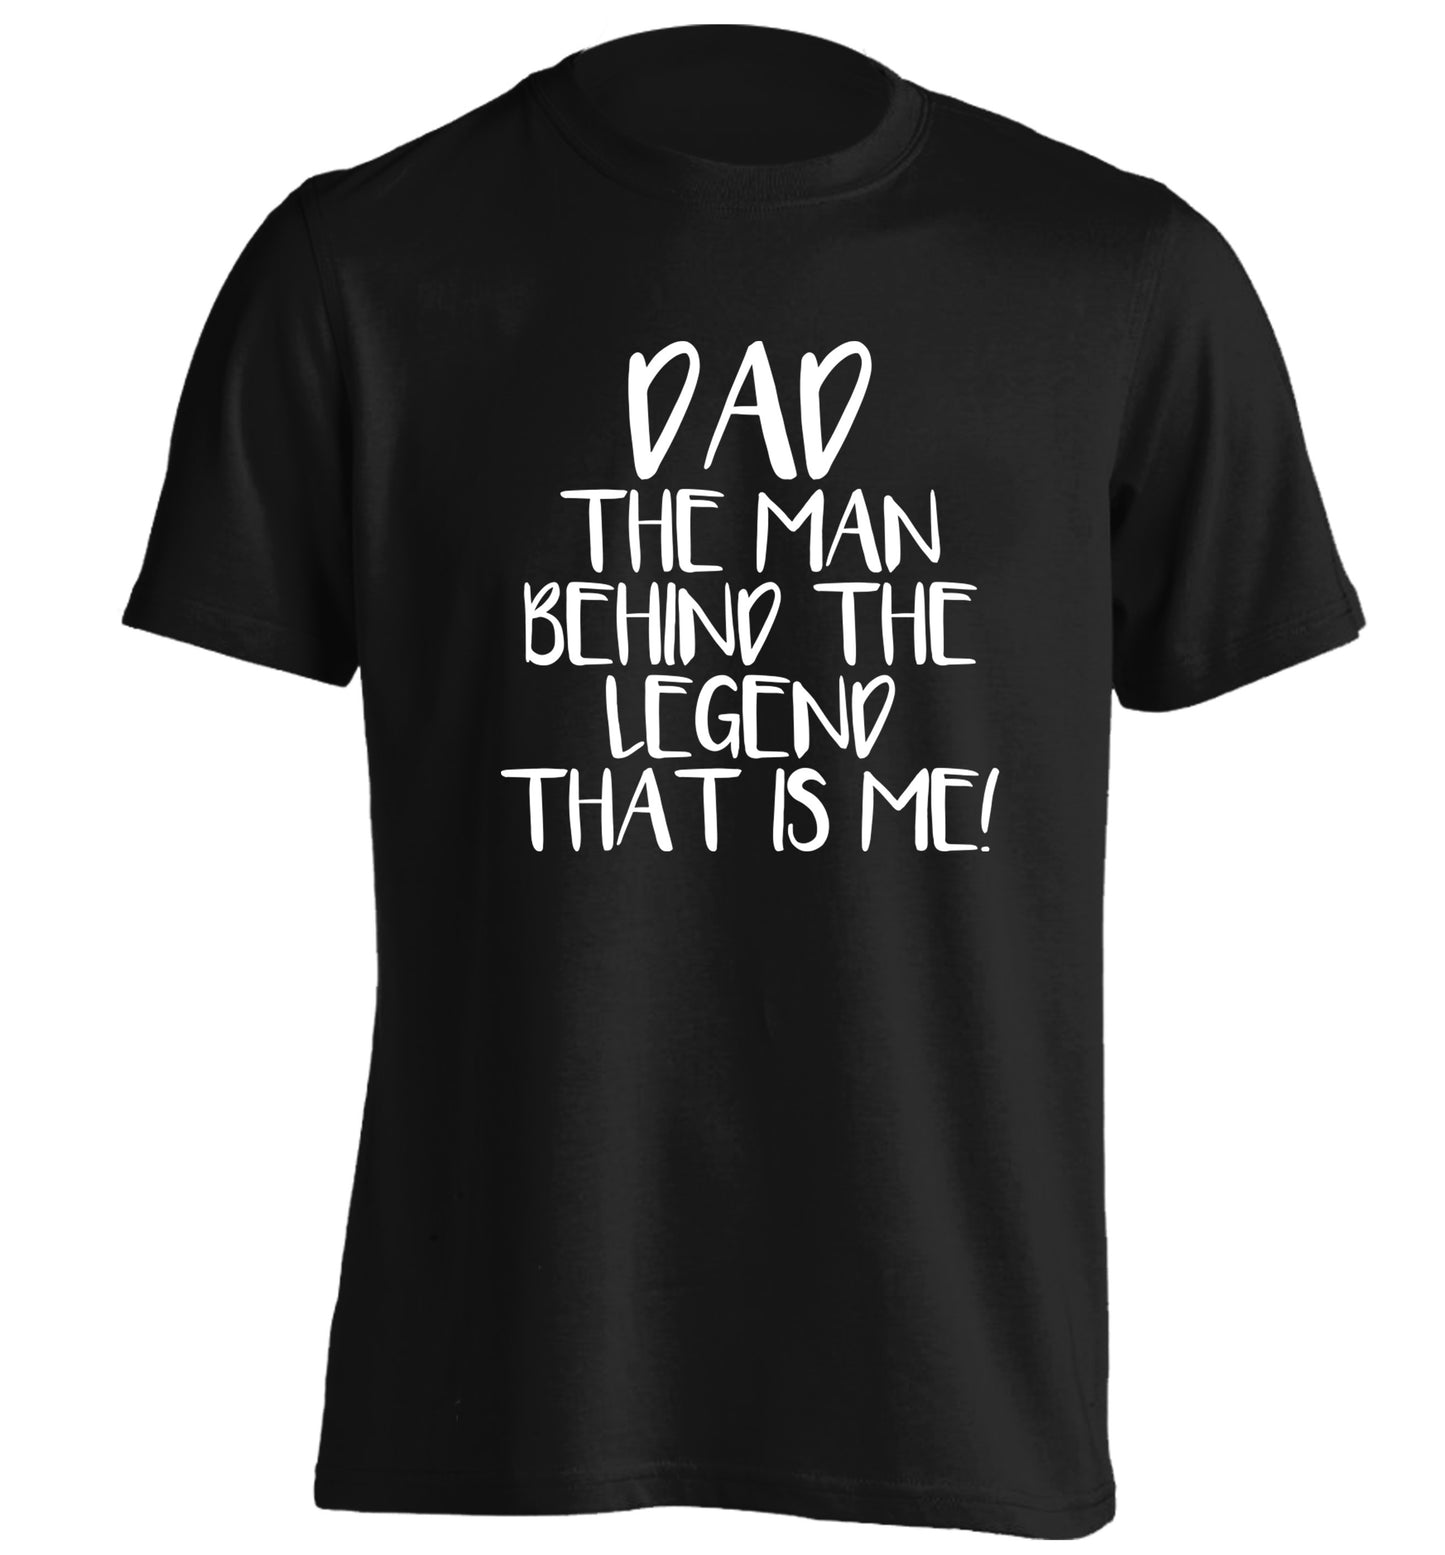 Dad the man behind the legend that is me! adults unisex black Tshirt 2XL